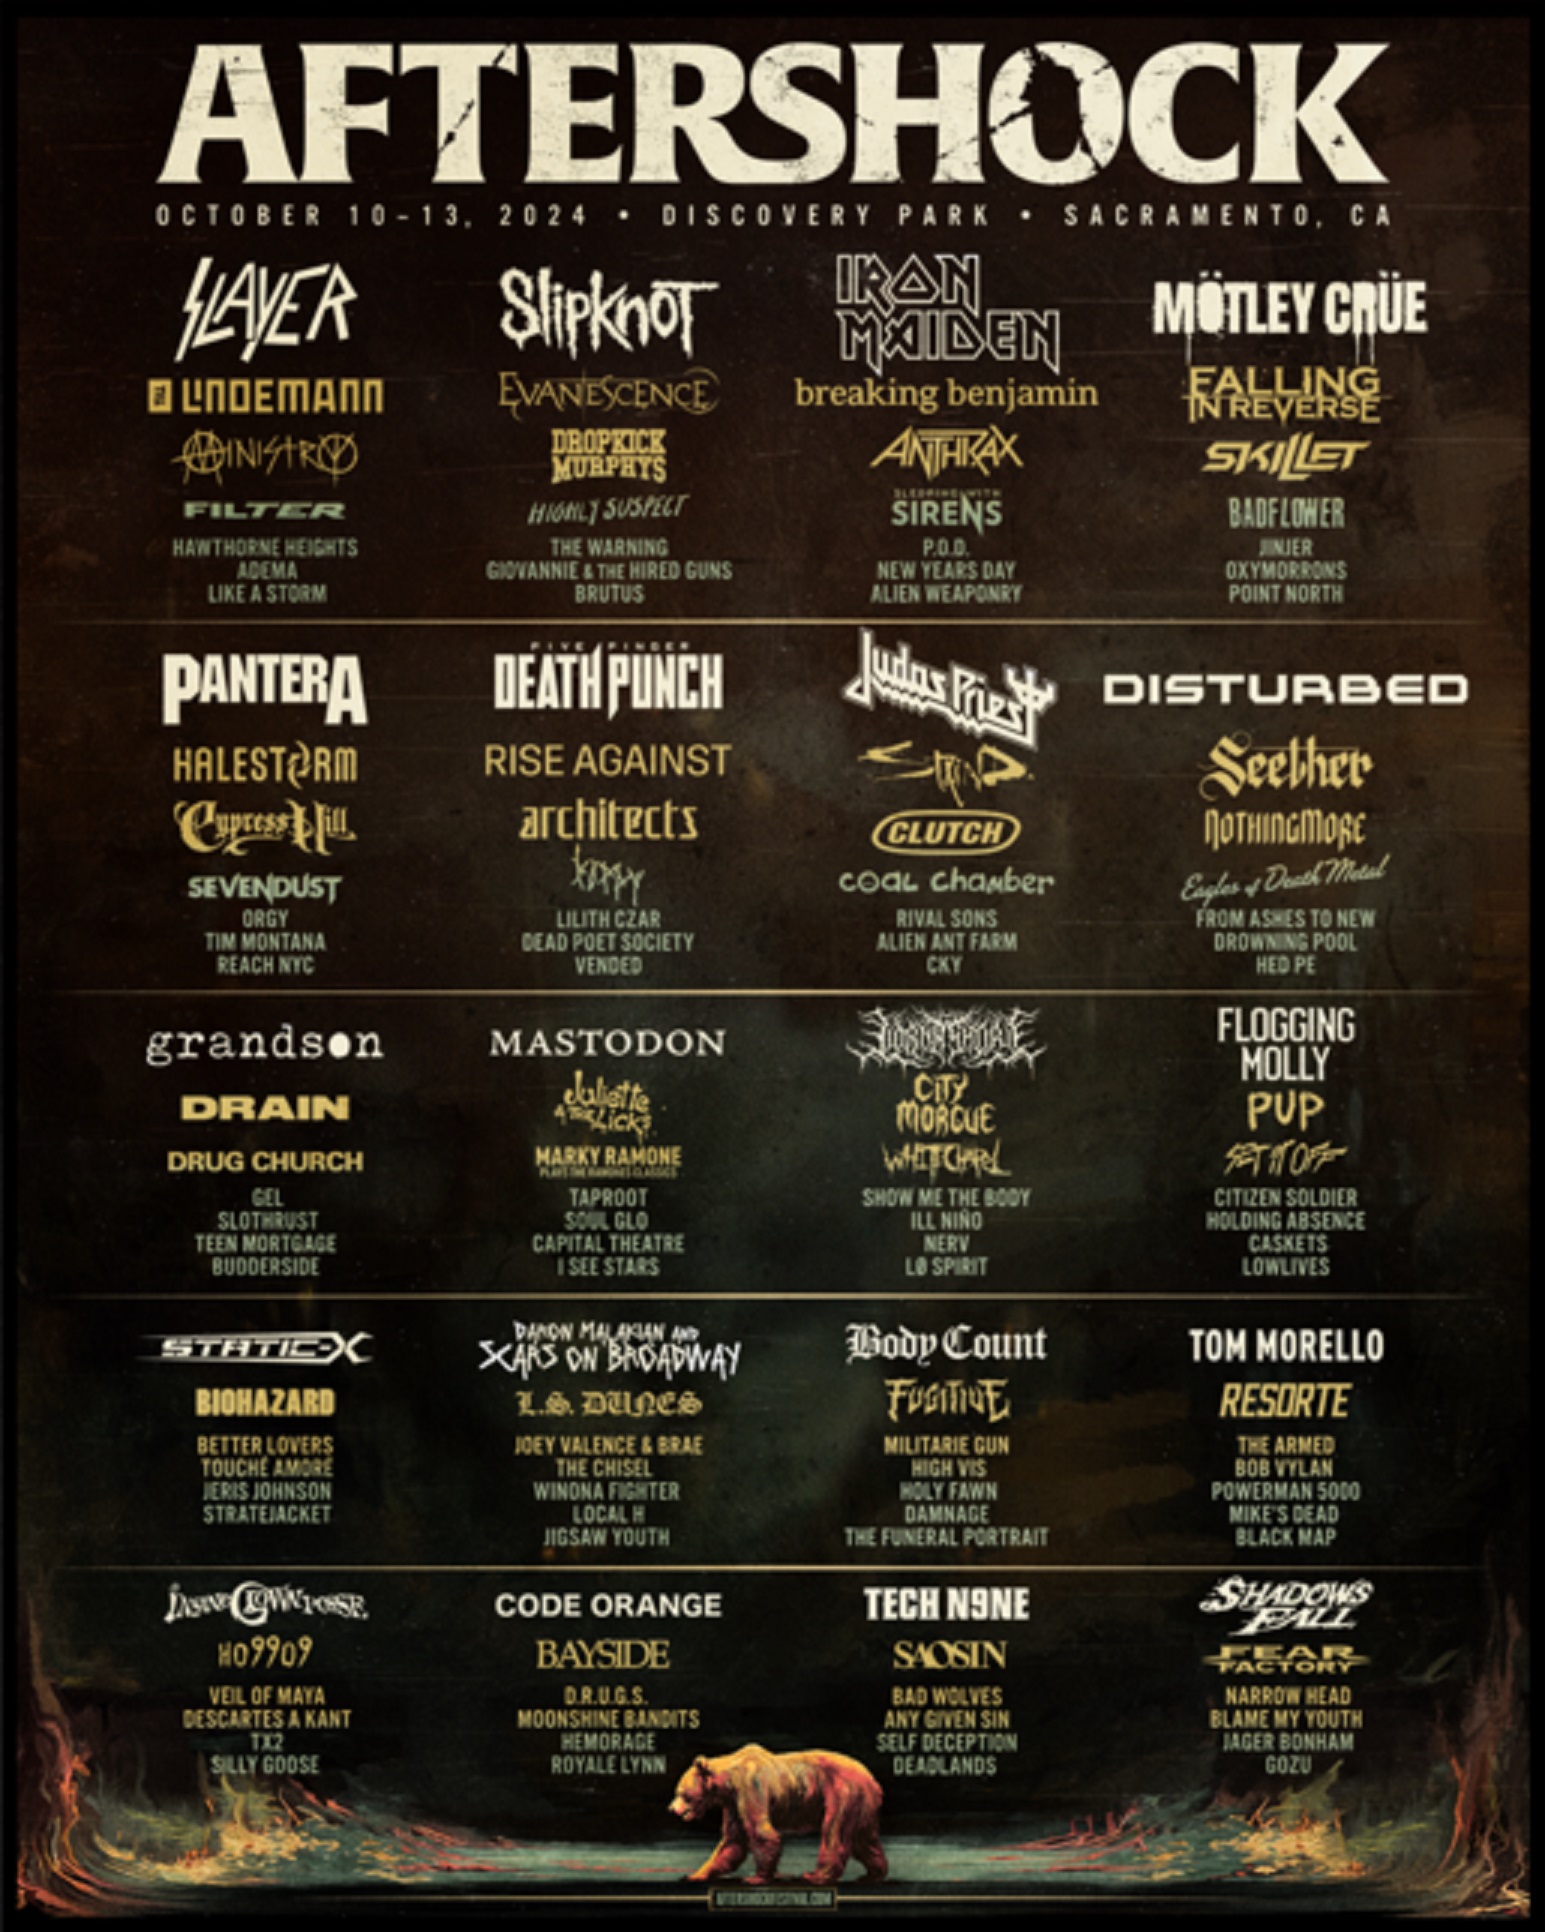 Aftershock 2024: The West Coast’s Largest Rock Festival Returns To Discovery Park In Sacramento, CA